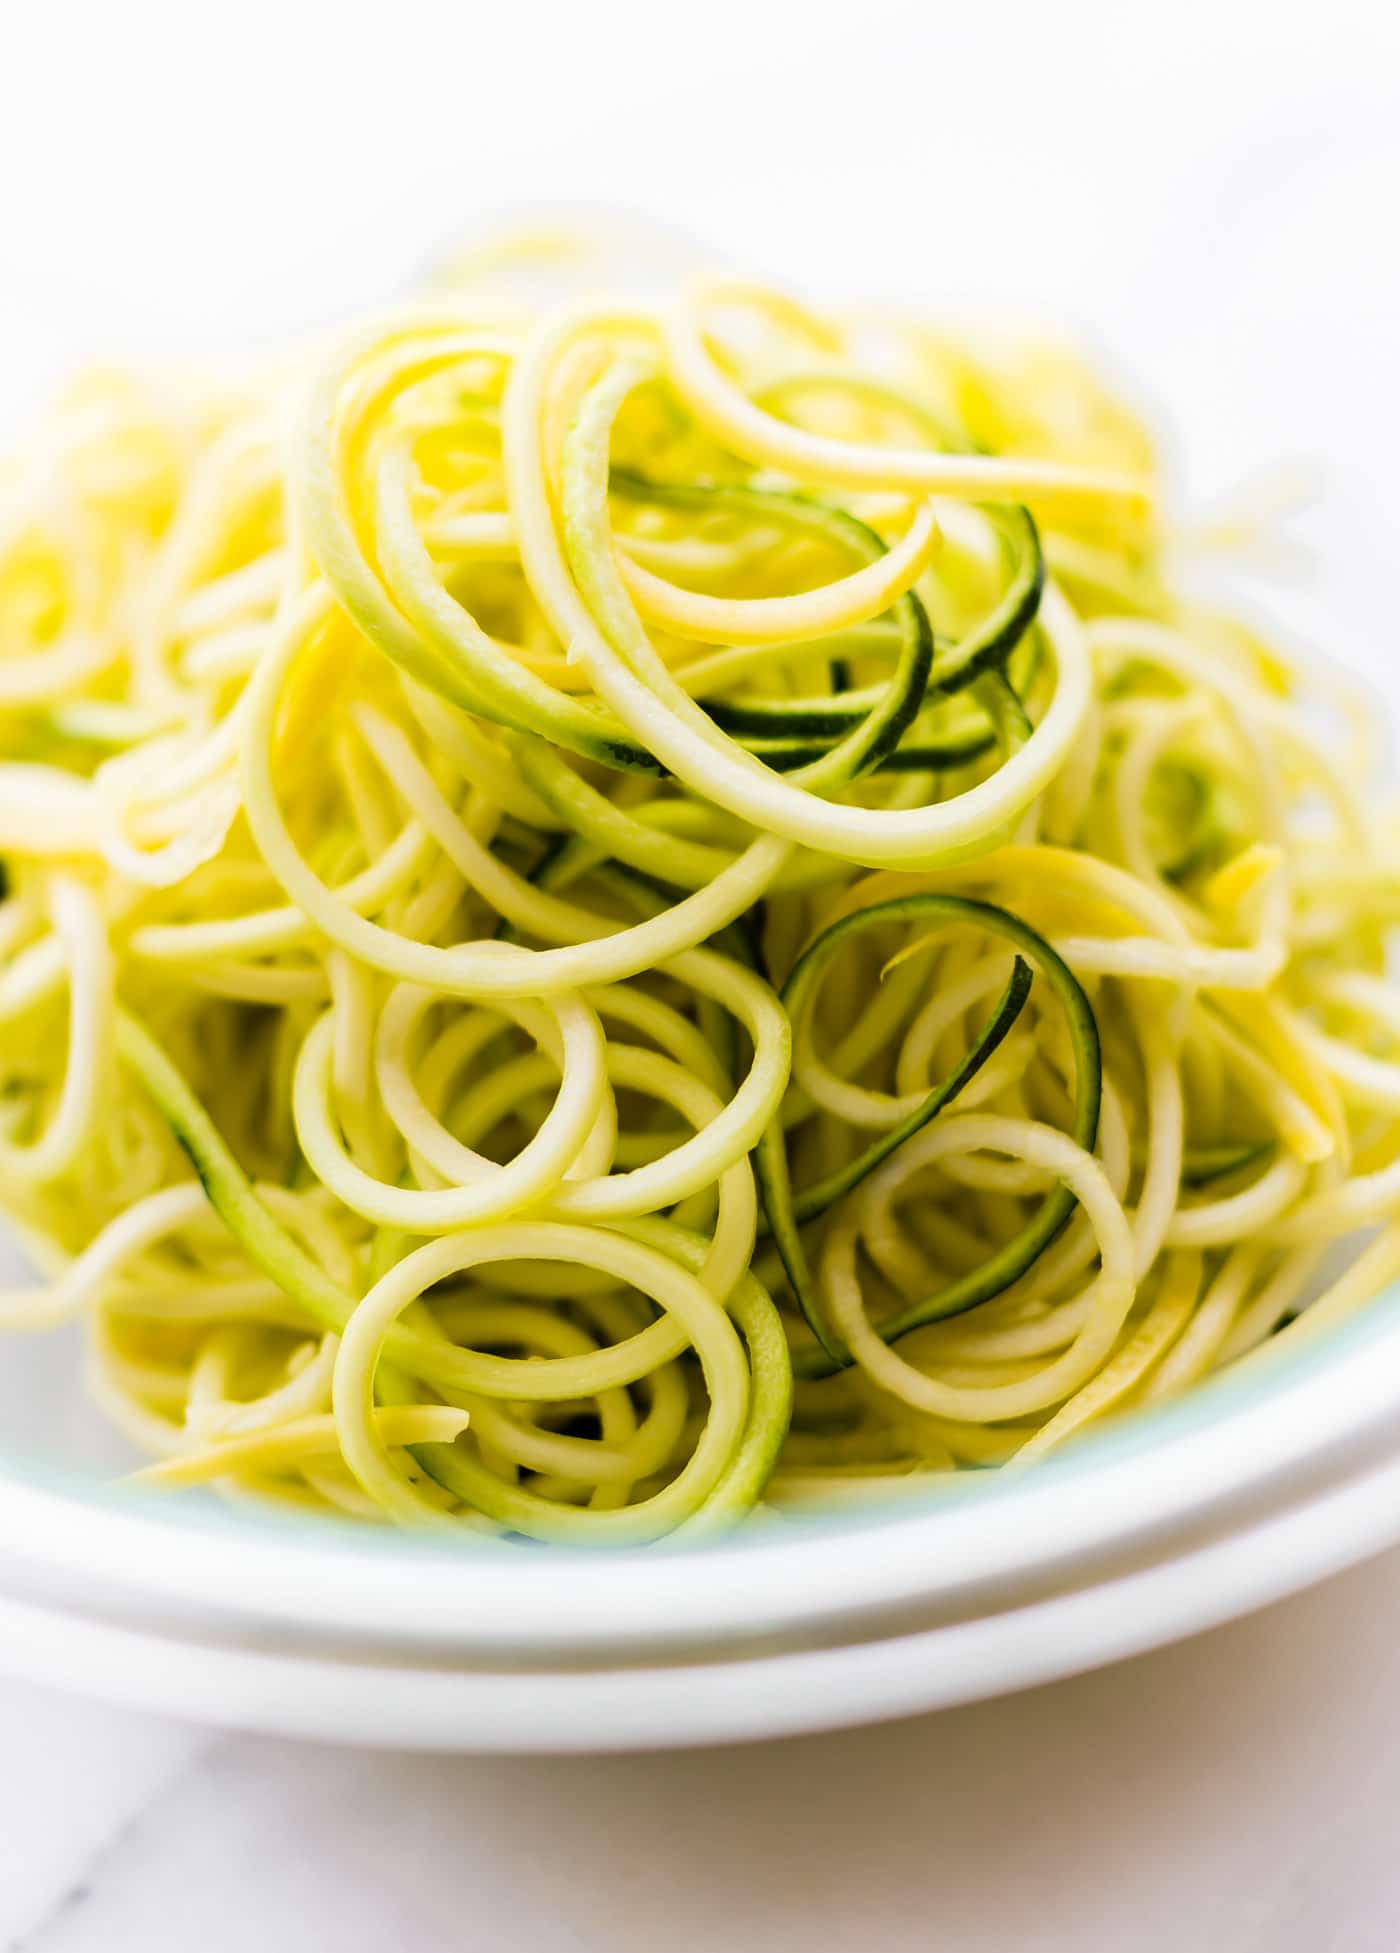 zucchini noodles cut into thin spirals in bowl